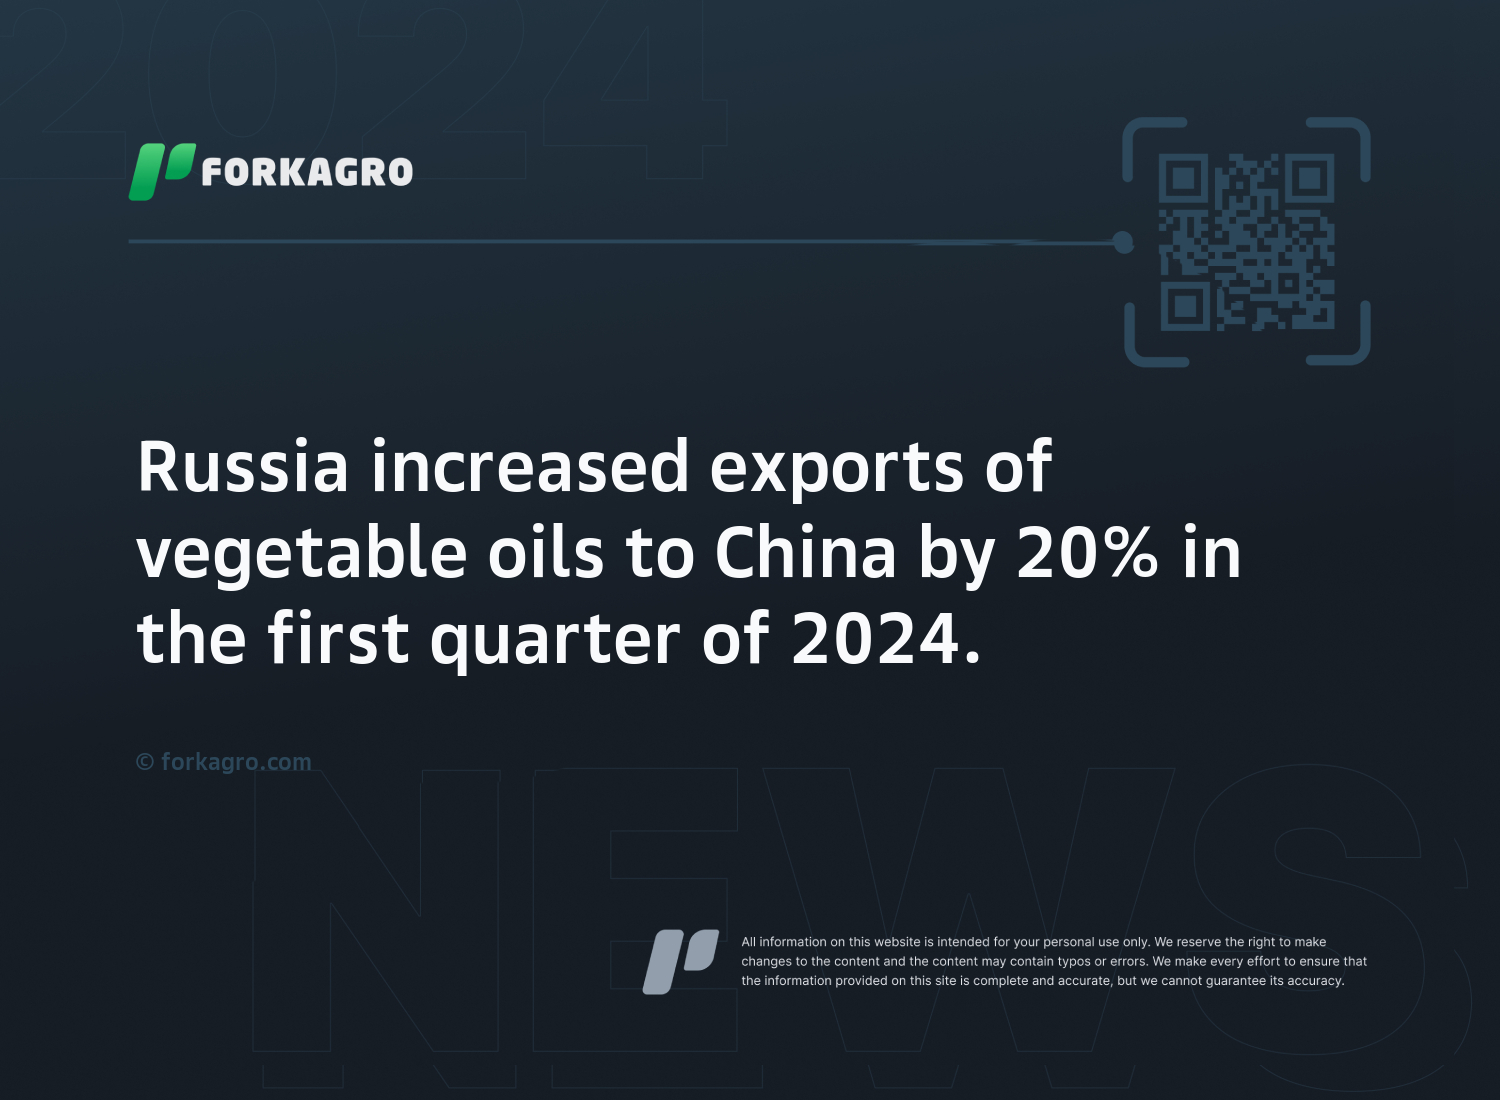 Russia increased exports of vegetable oils to China by 20% in the first quarter of 2024.